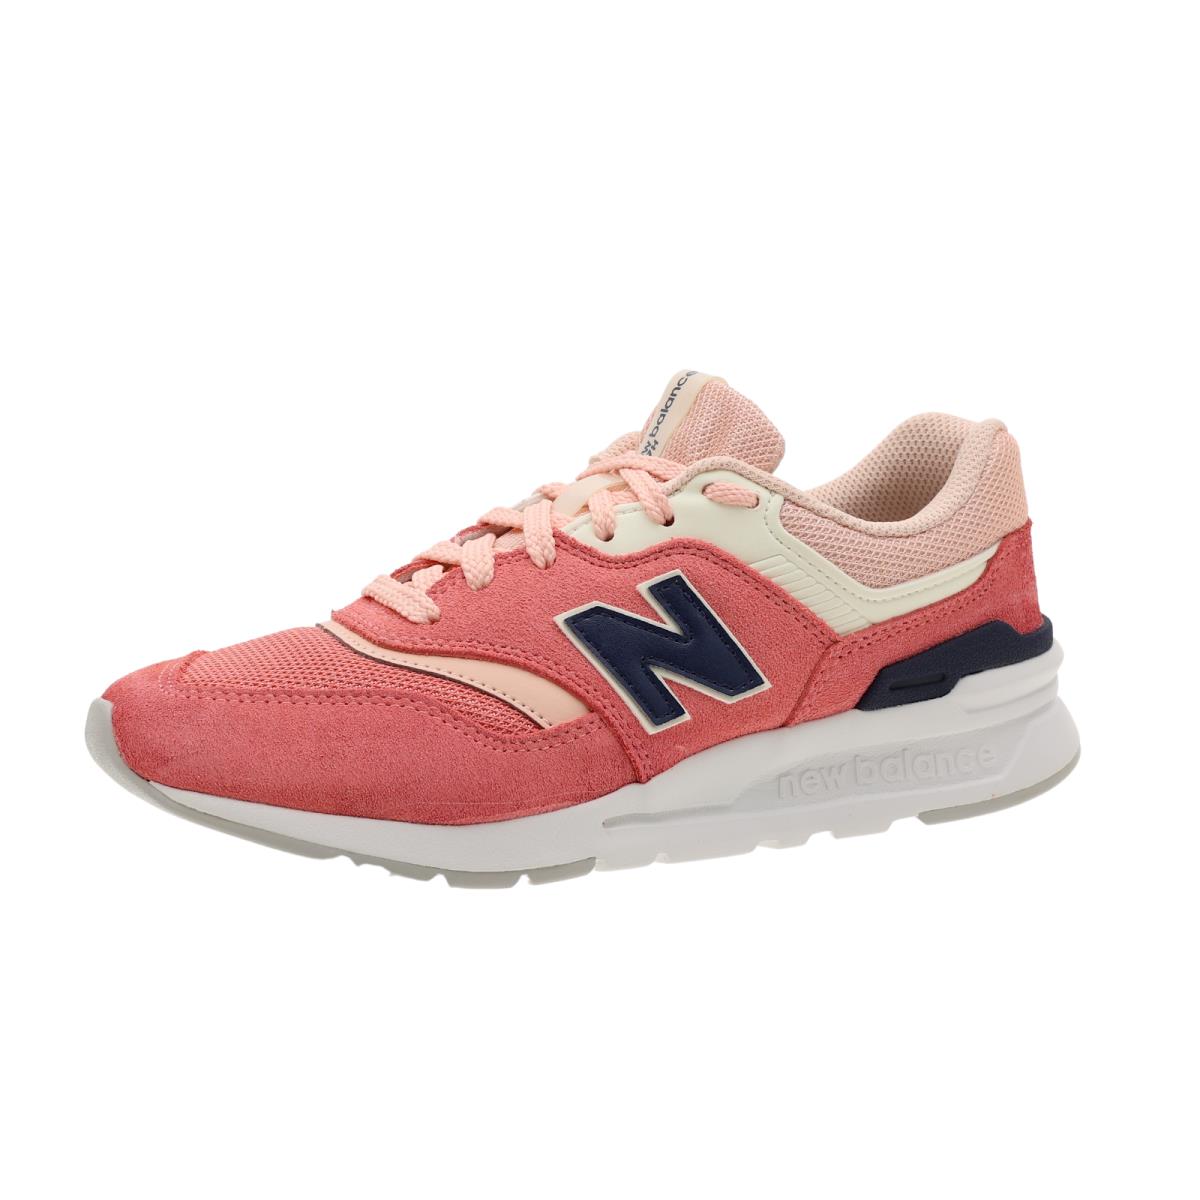 New Balance Women`s Classics 997H Pink Sneaker Shoes N7989 Size 6